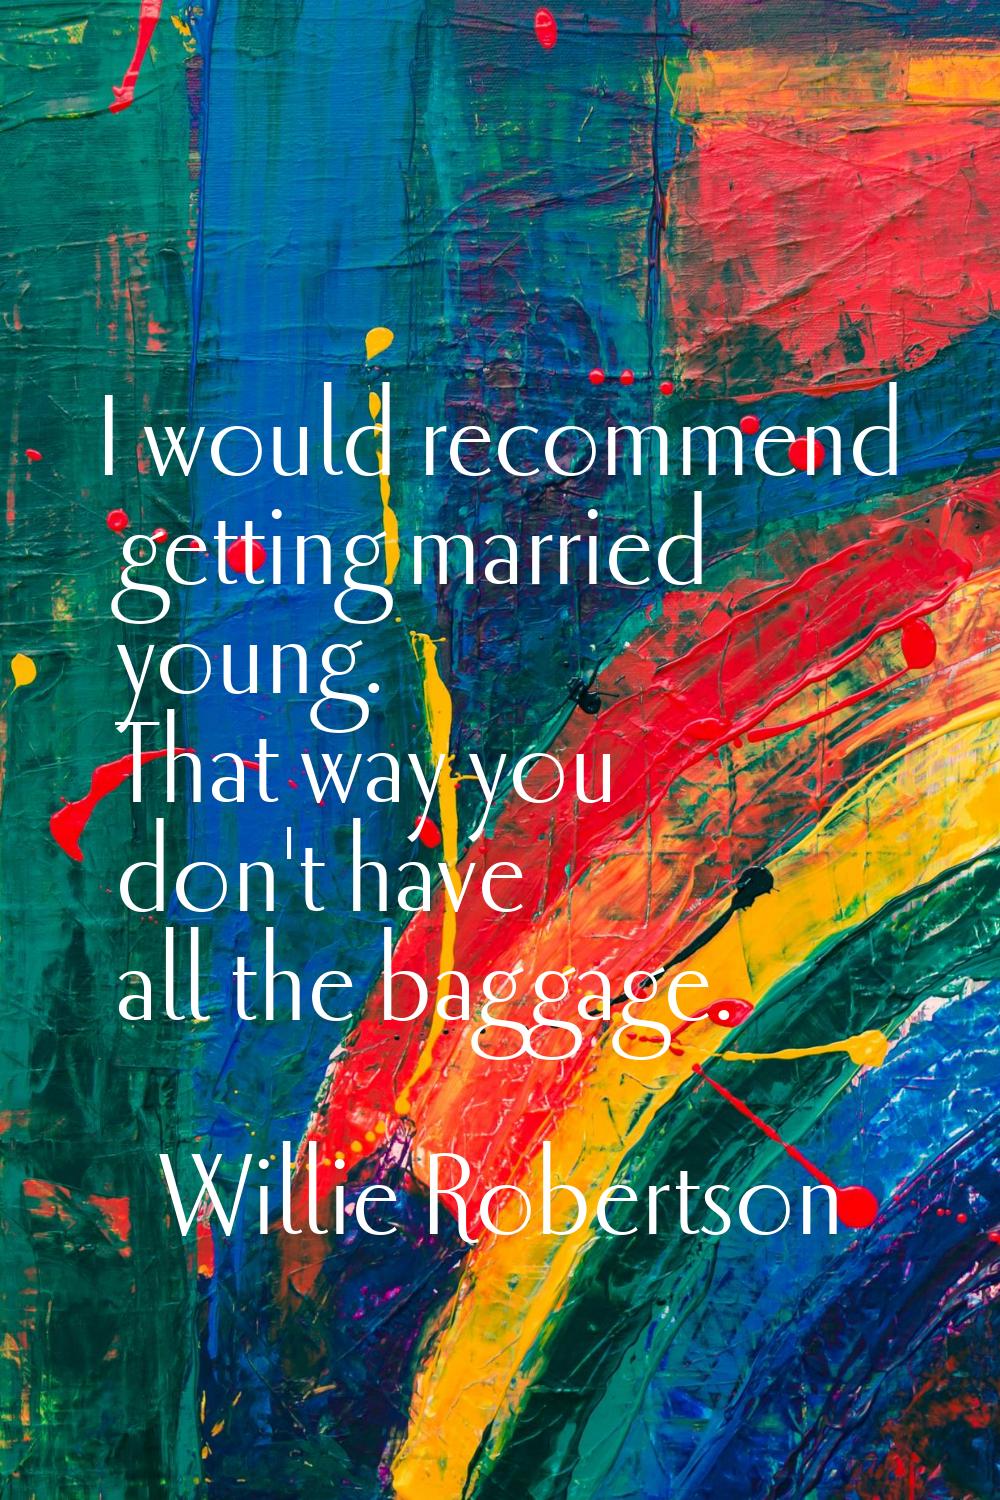 I would recommend getting married young. That way you don't have all the baggage.